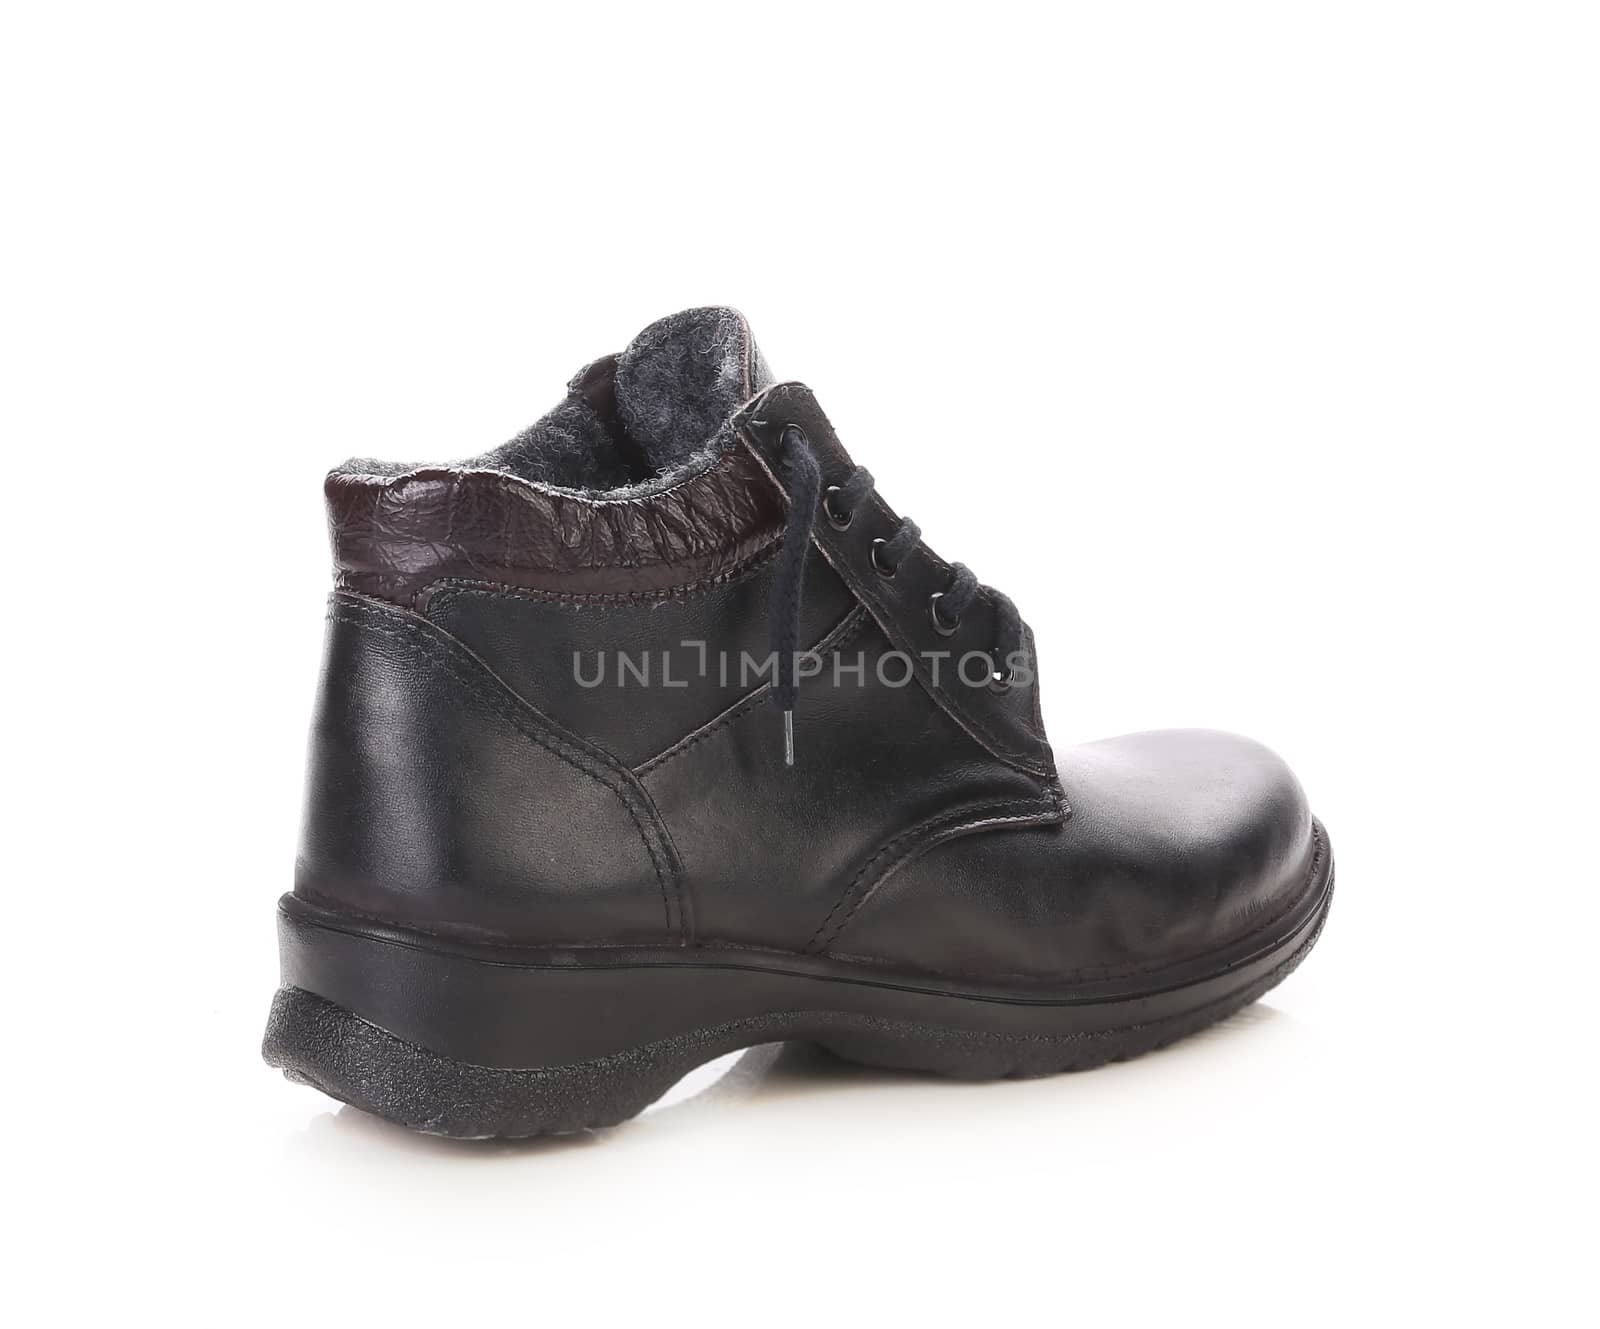 Black winter boot. Isolated on white background.